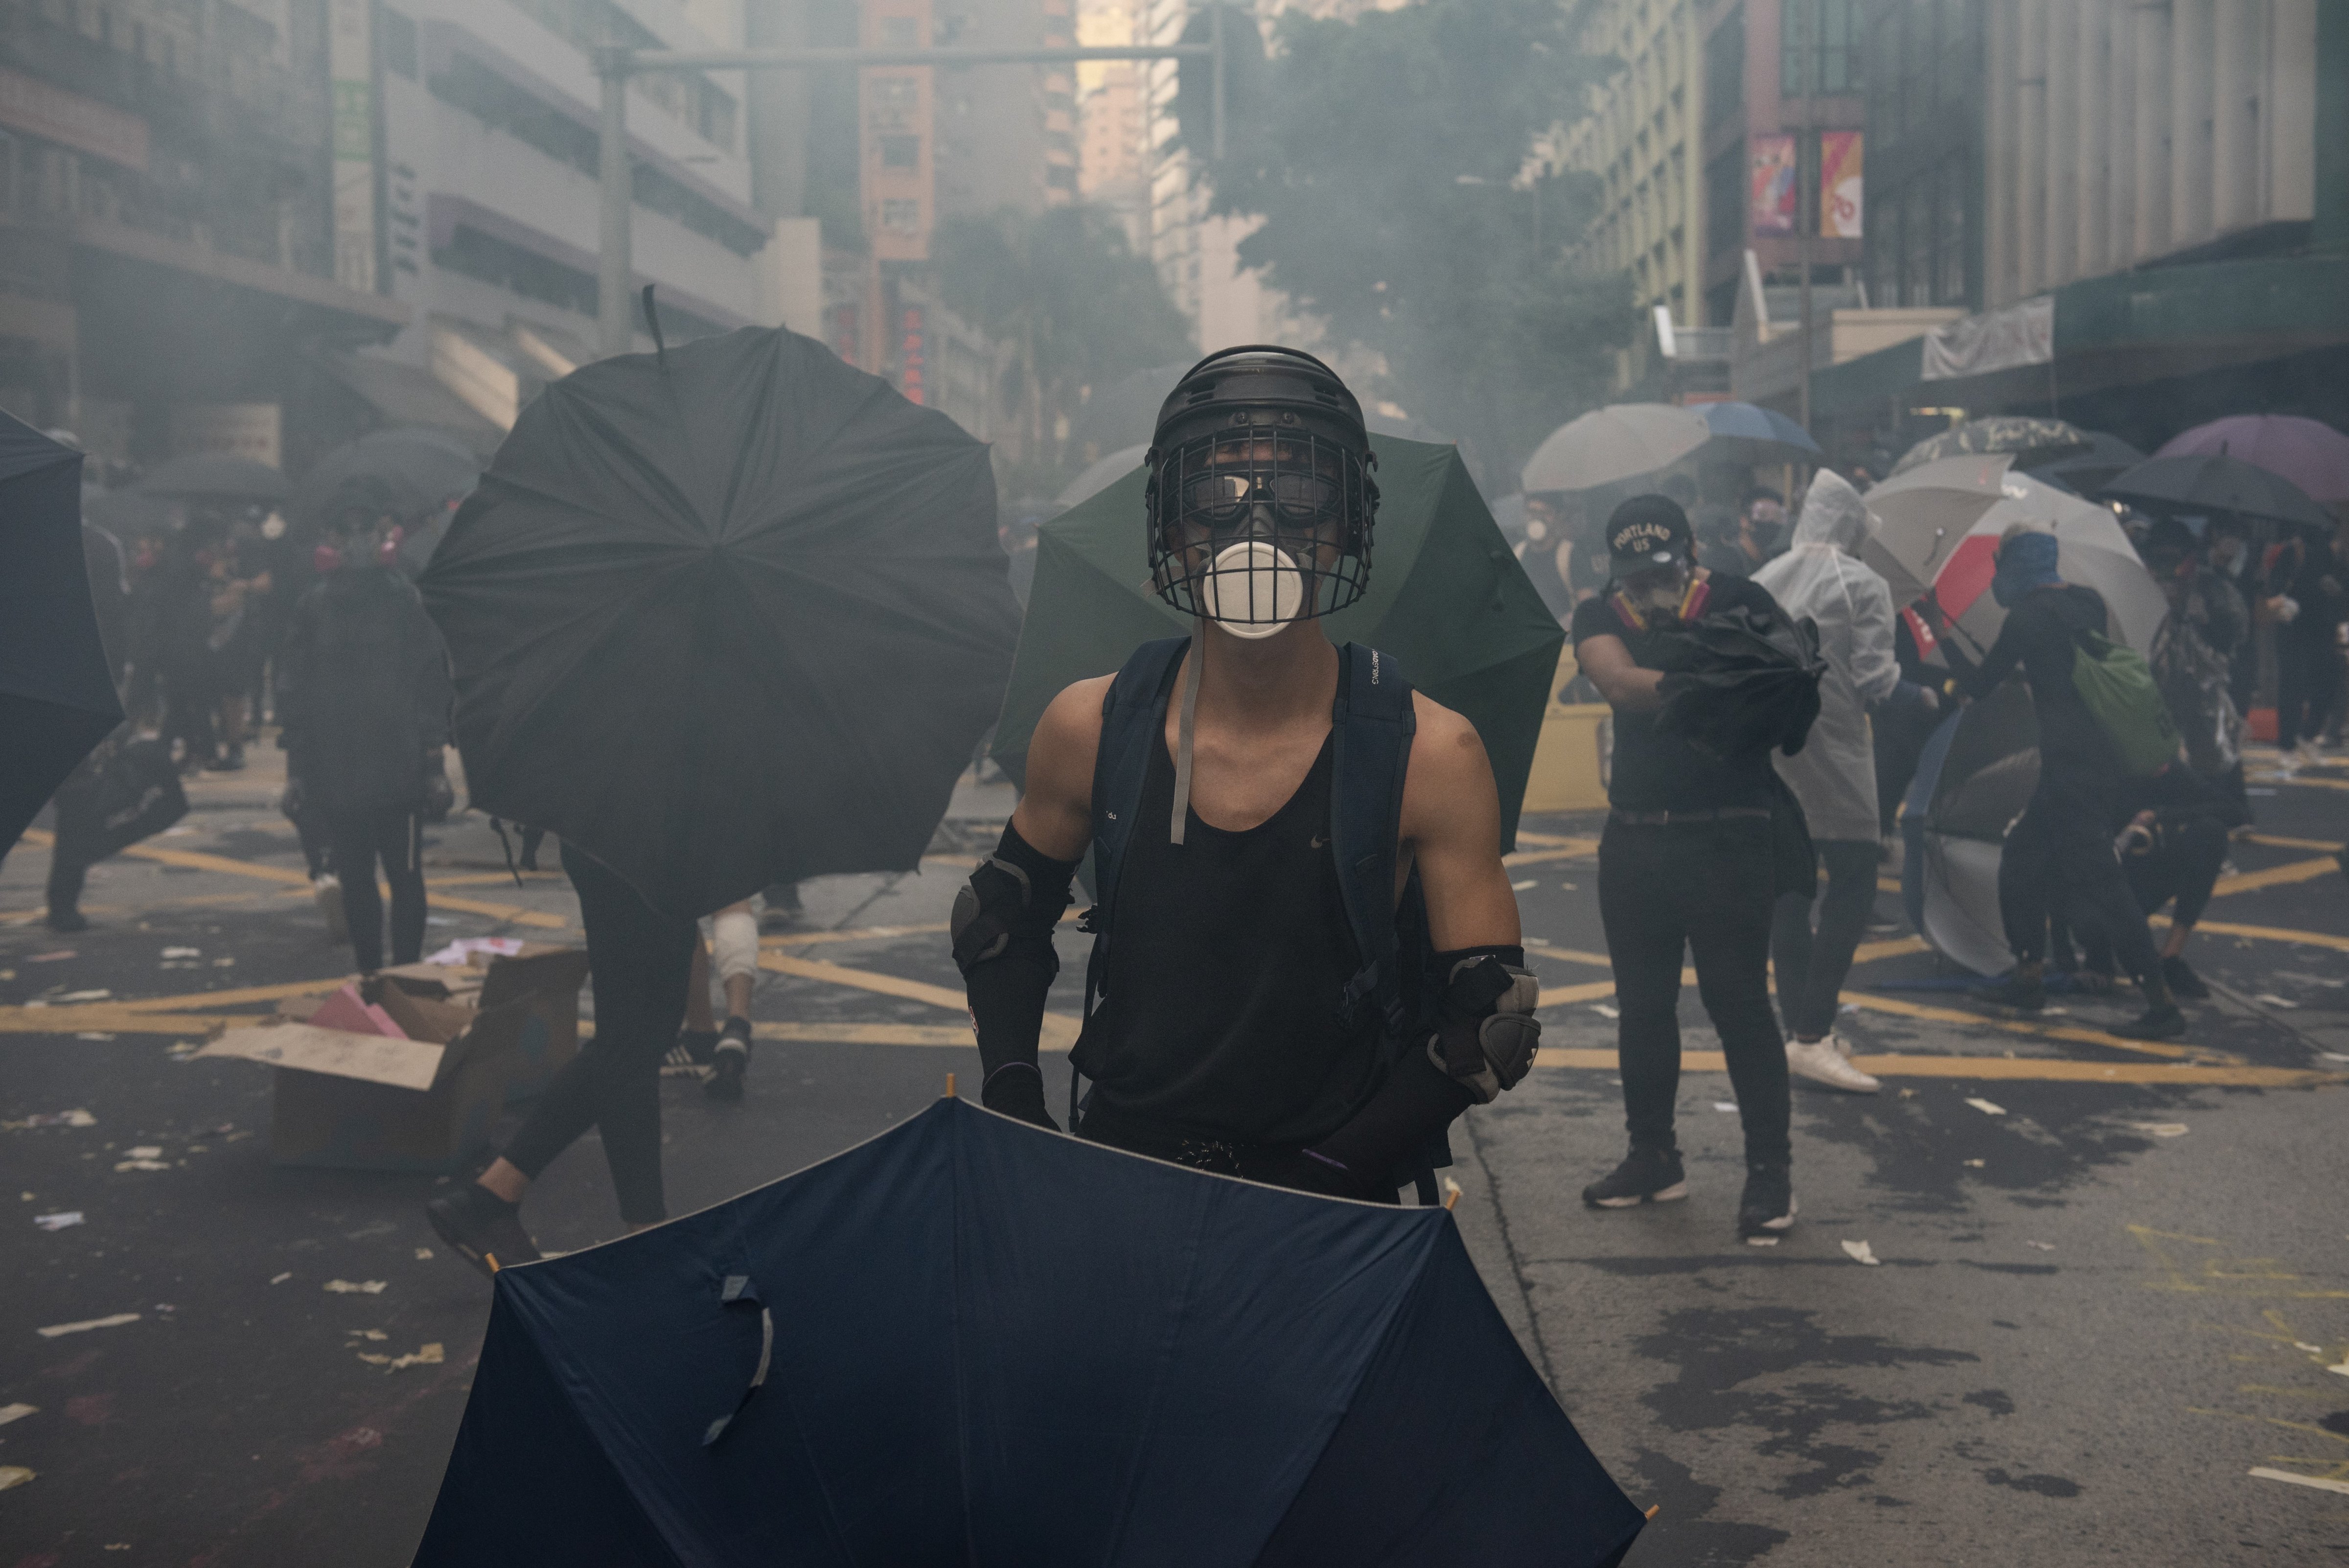 A protester holds an umbrella surrounded by tear gas as thousands of anti-China protesters clash with police in Hong Kong on October 01, 2019. (Miguel Candela Poblacion/Anadolu Agency via Getty Images)